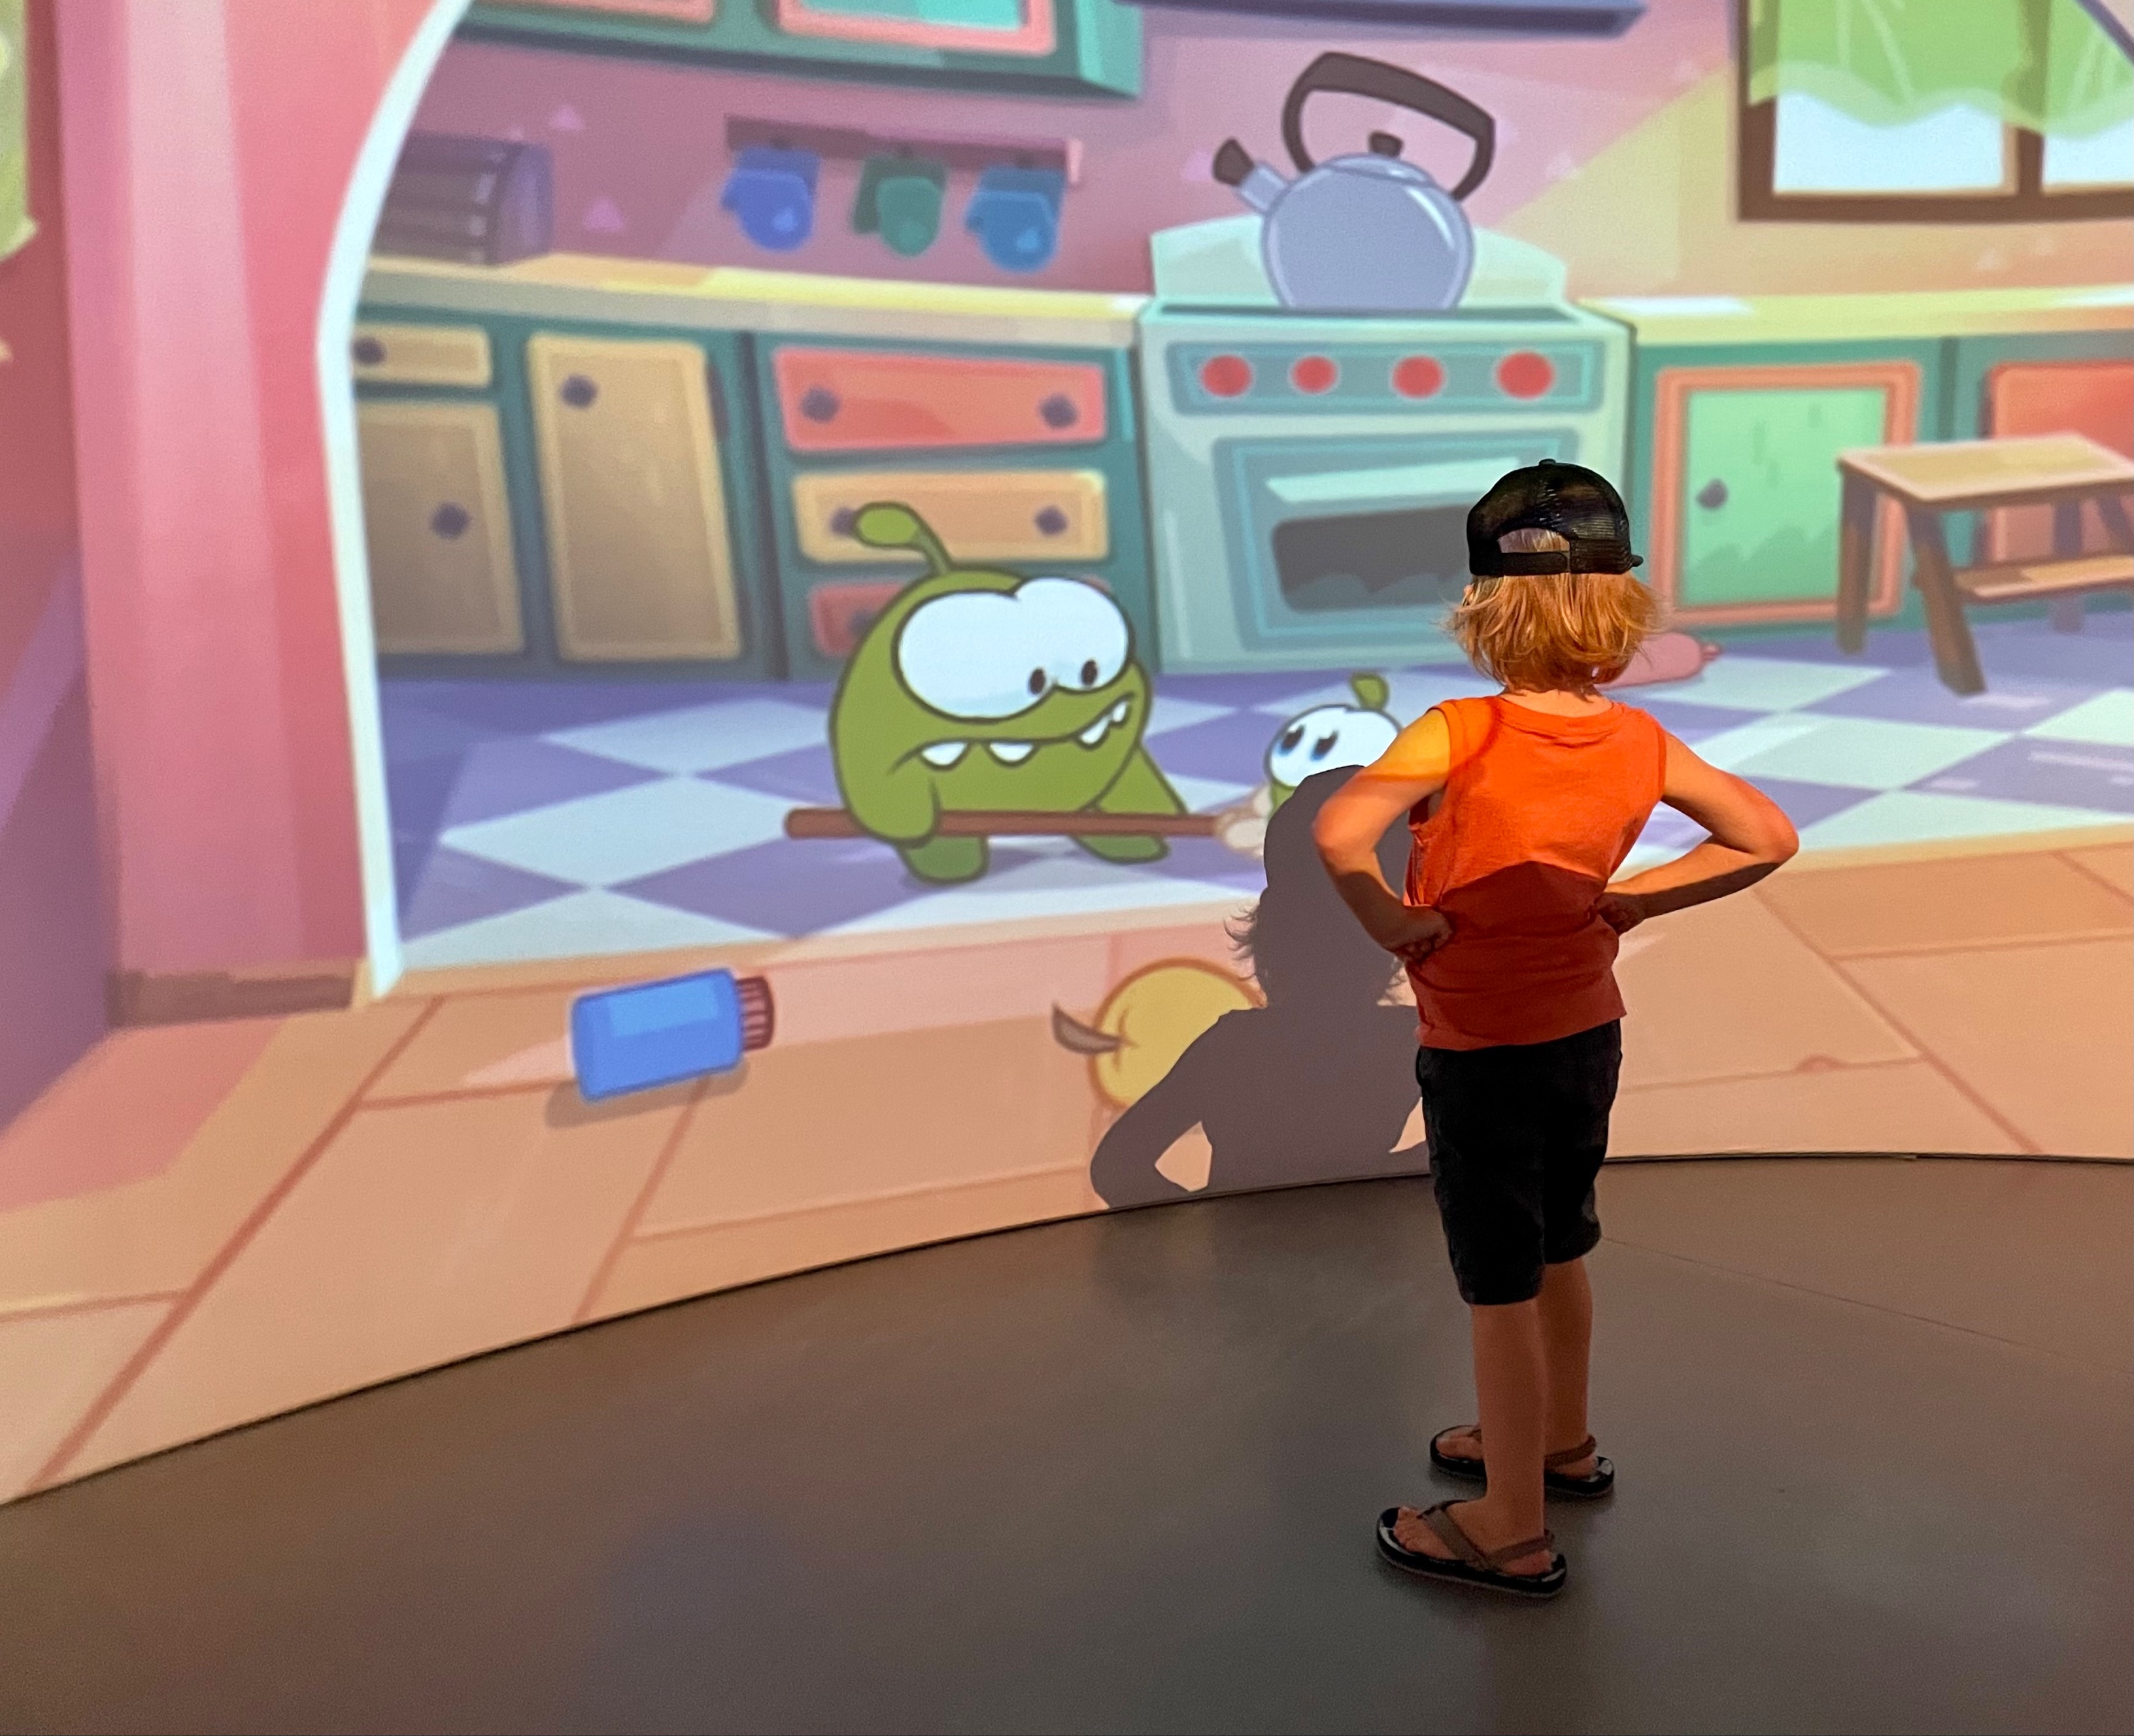 Child looking at large Igloo screen with cartoons on.